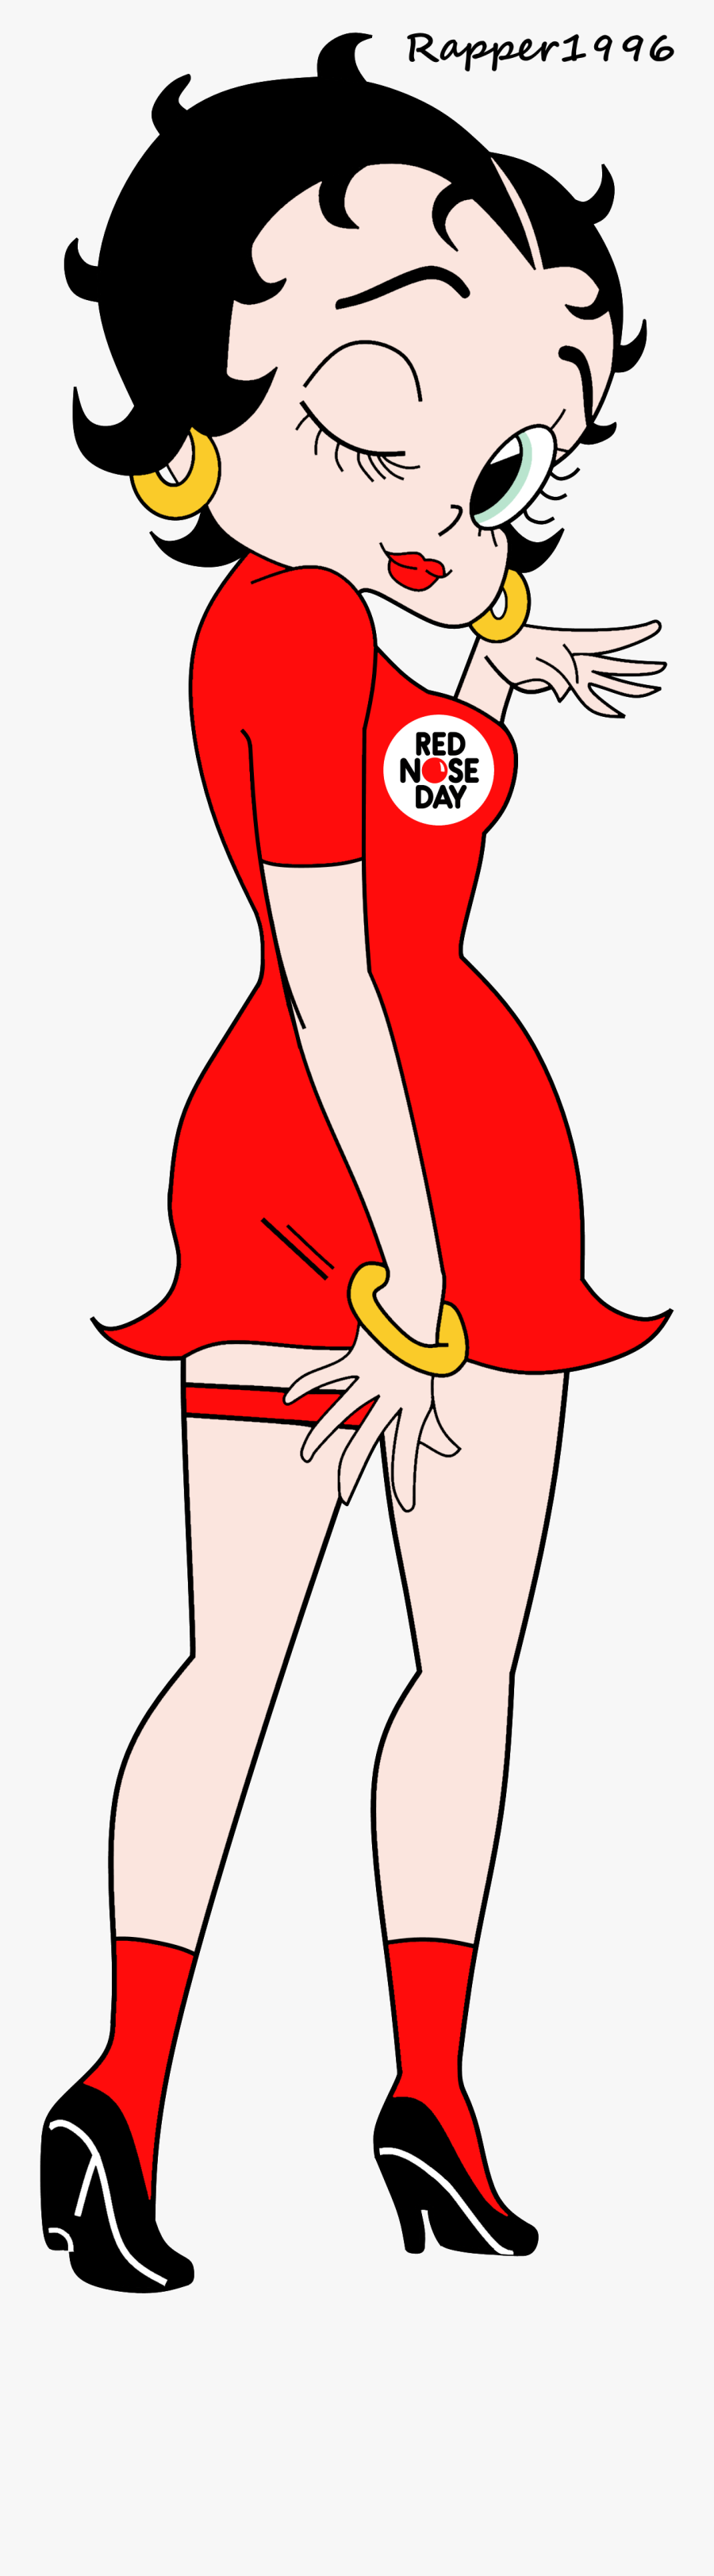 Betty Boop Anime Comic Relief Render By Rapper1996 - Girl Funny Cartoon, Transparent Clipart